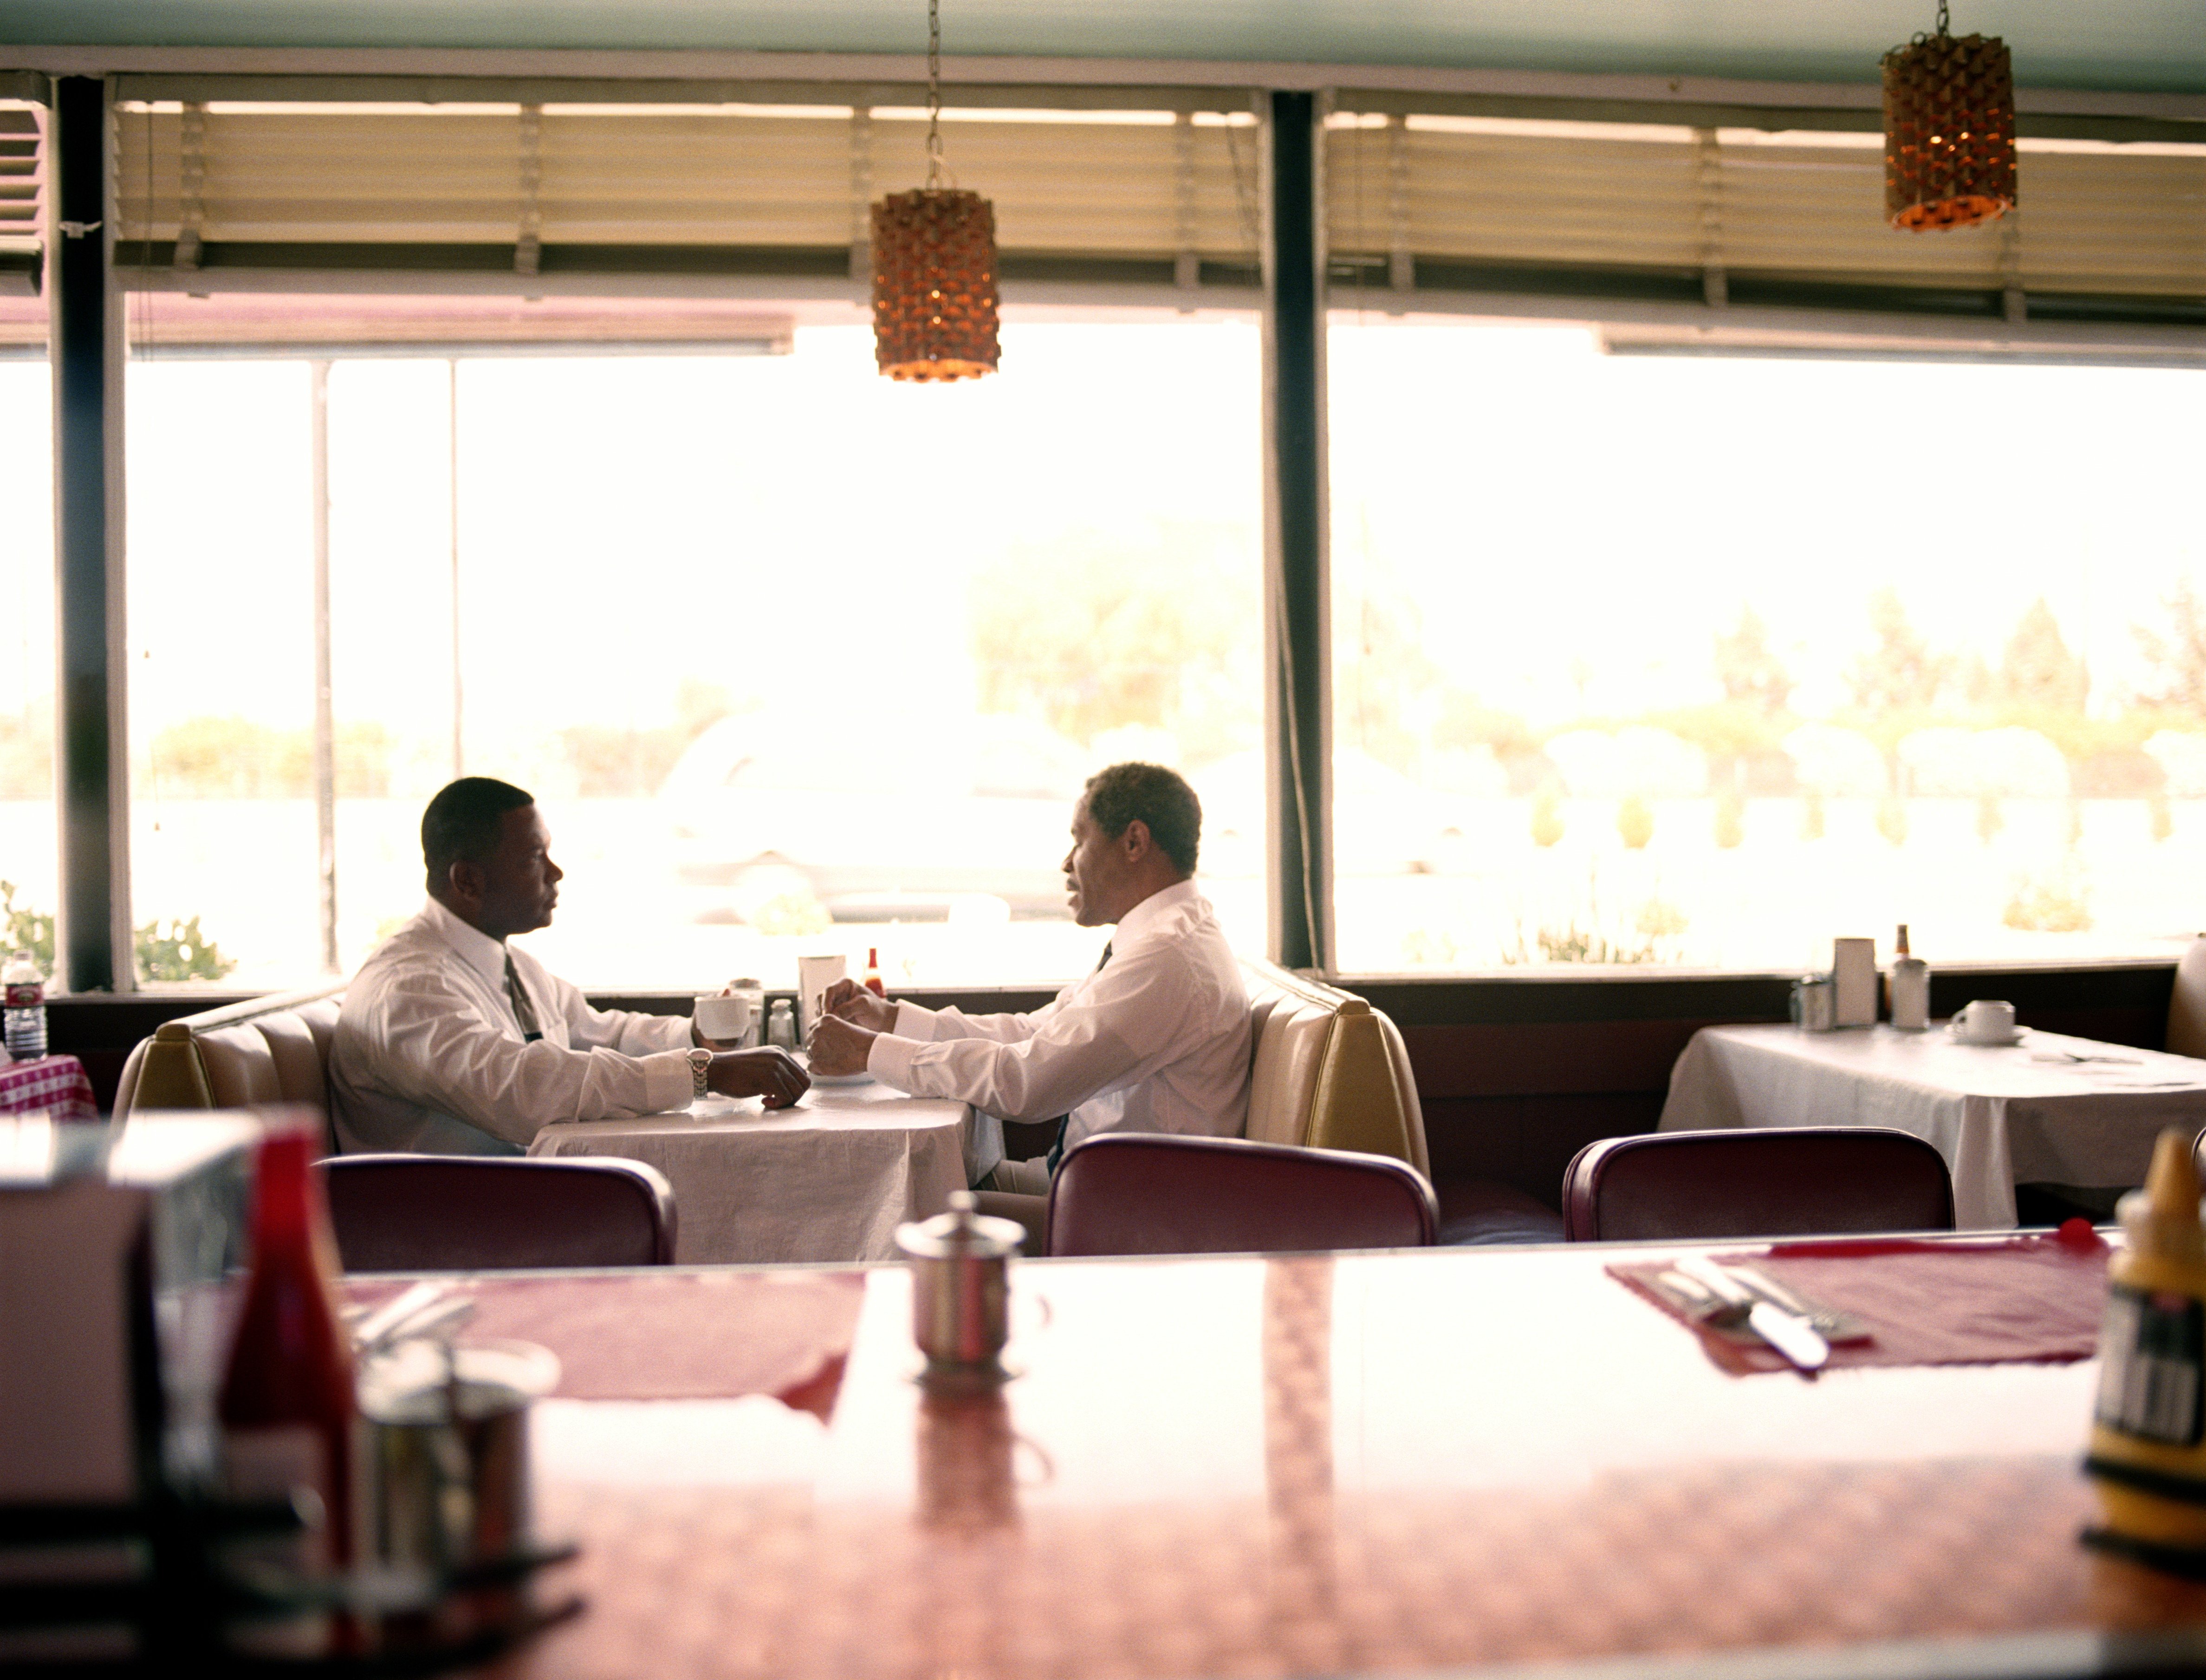 The two firefighters were having coffee at the diner. | Source: Getty Images